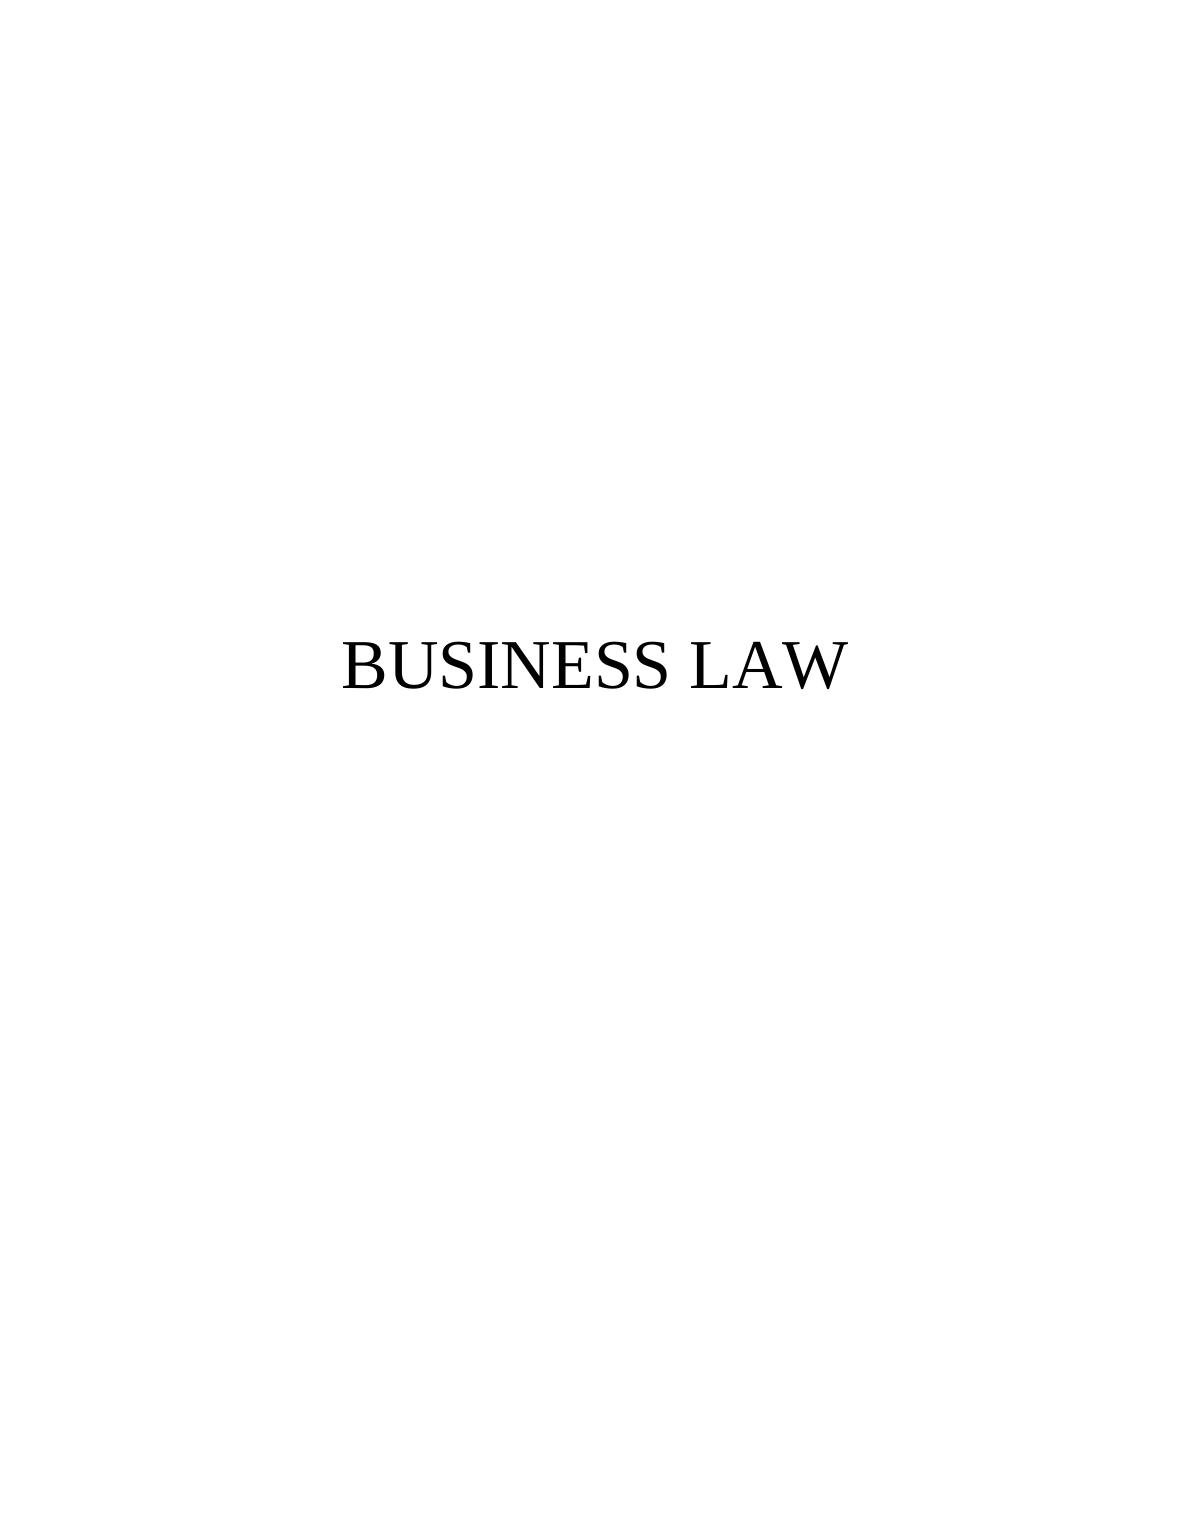 BUSINESS LAW INTRODUCTION 1 LAW OF TORTS. Importance of Principles of Negligence in Professional Life_1